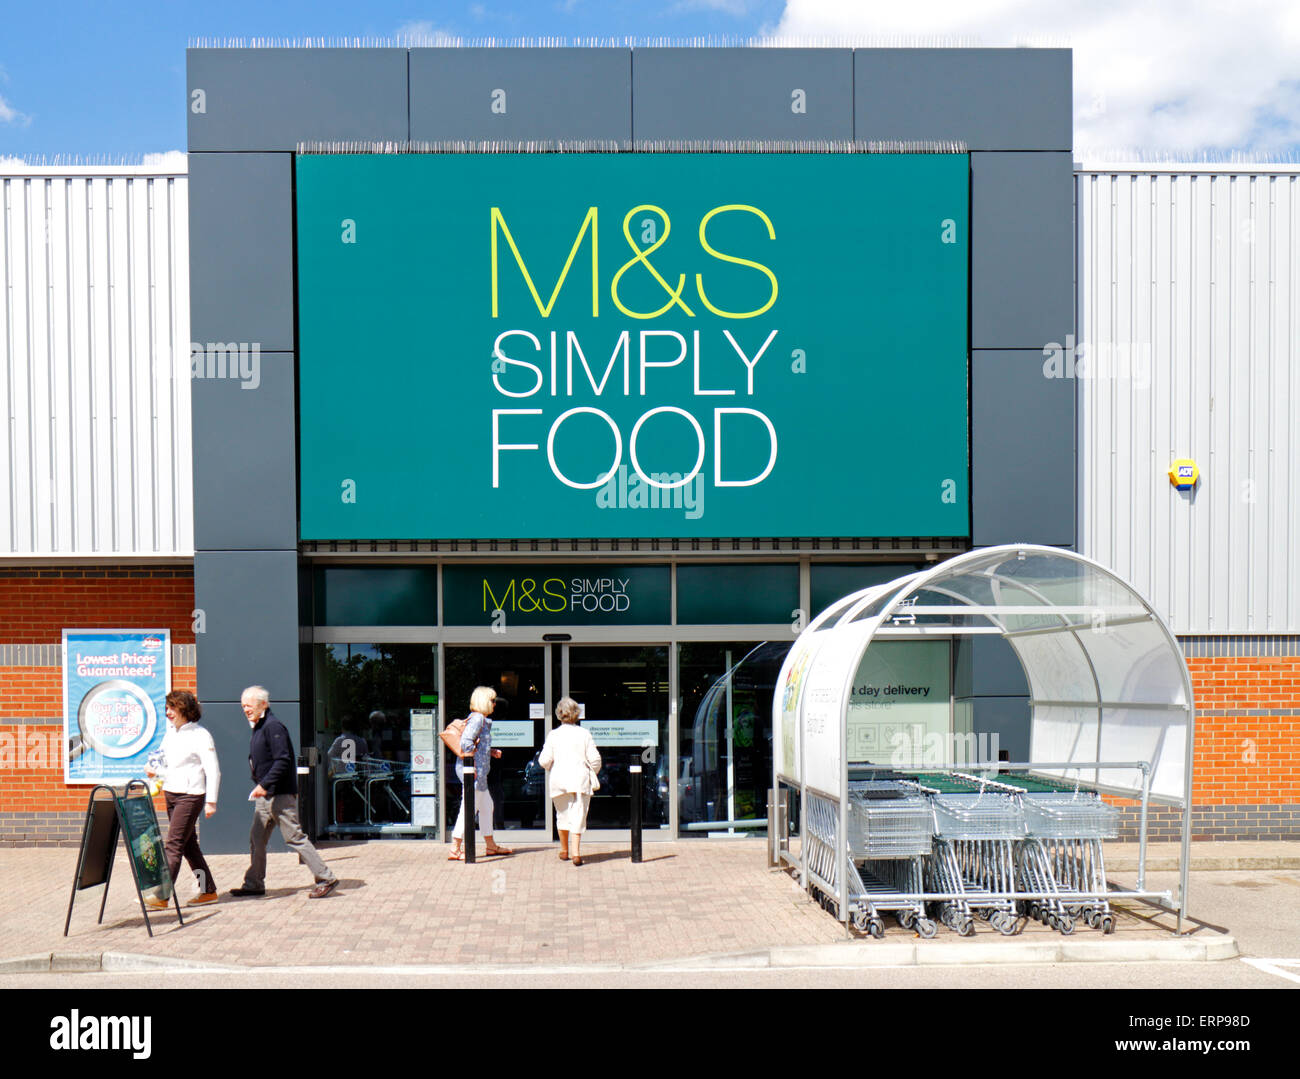 A view of the entrance to the M&S food hall at Sweet Briar Retail Park, Norwich, Norfolk, England, United Kingdom. Stock Photo